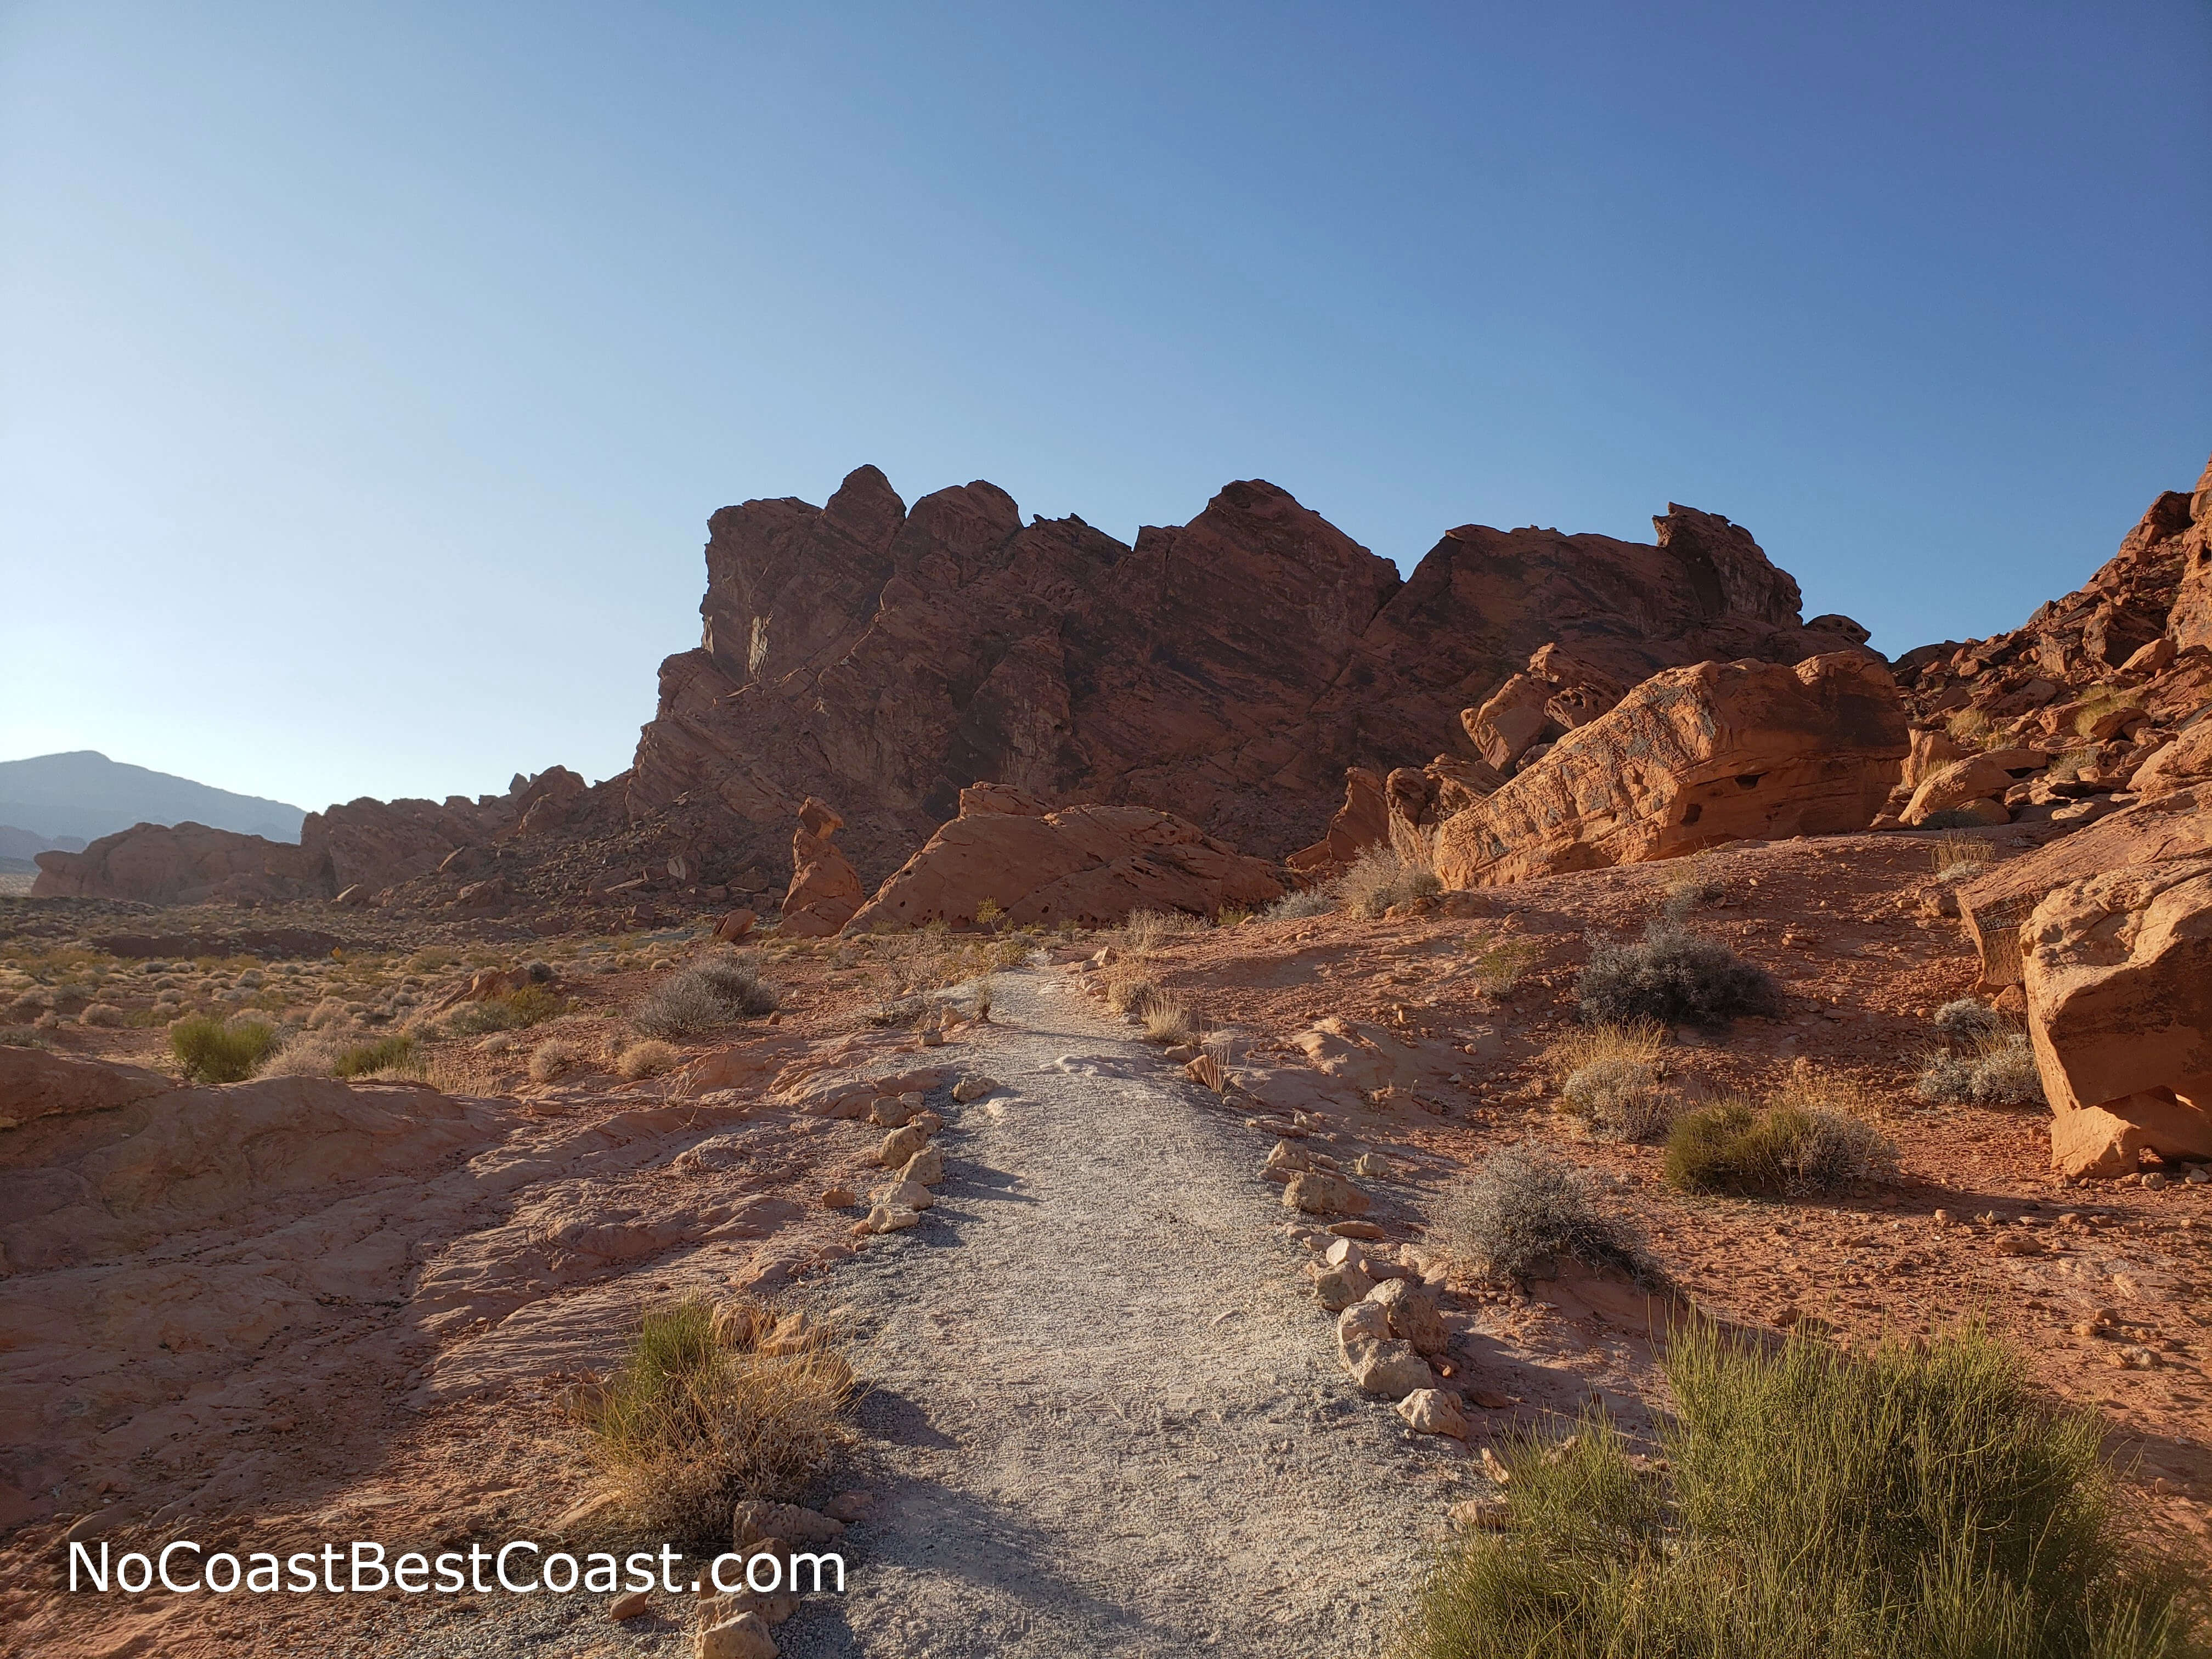 The desert trail leading to Balancing Rock